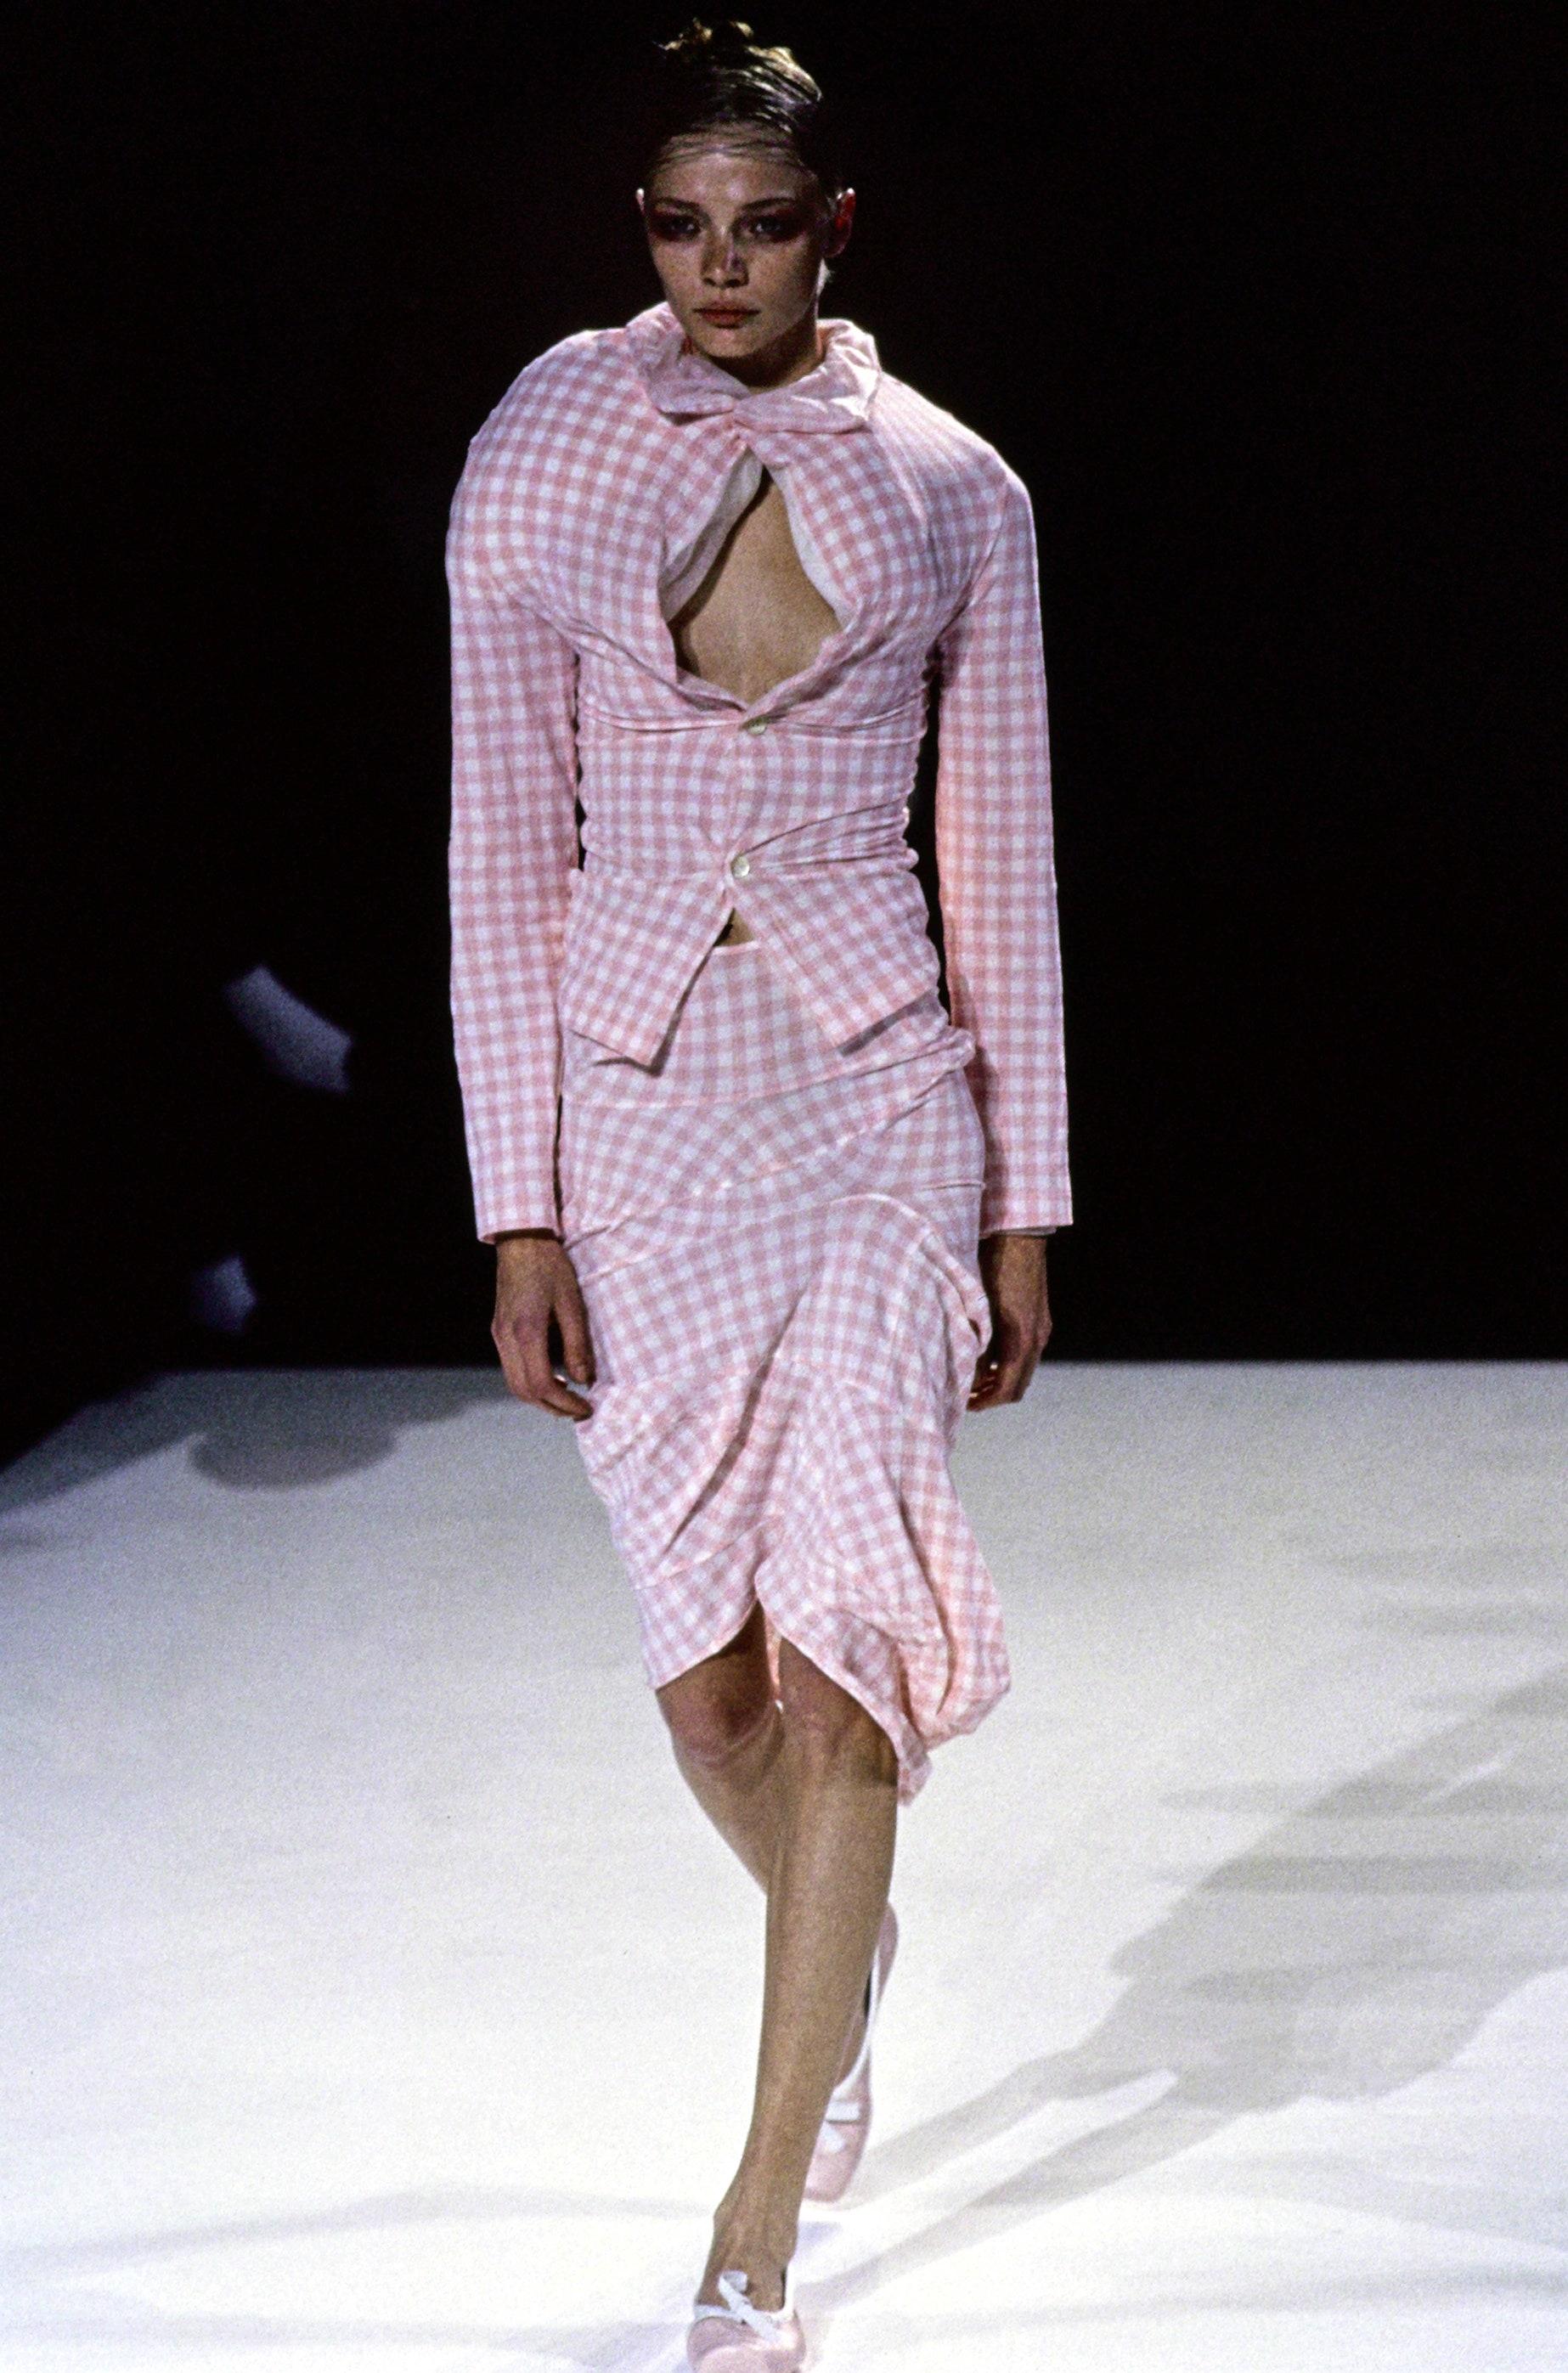 Comme des Garçons 'Body Meets Dress, Dress Meets Body' / 'Lumps and Bumps' stretch nylon gingham runway ensemble comprising: pink jacket with tulle lining, internal pillows, button closures; blue skirt with irregular, undulating seams with dripping